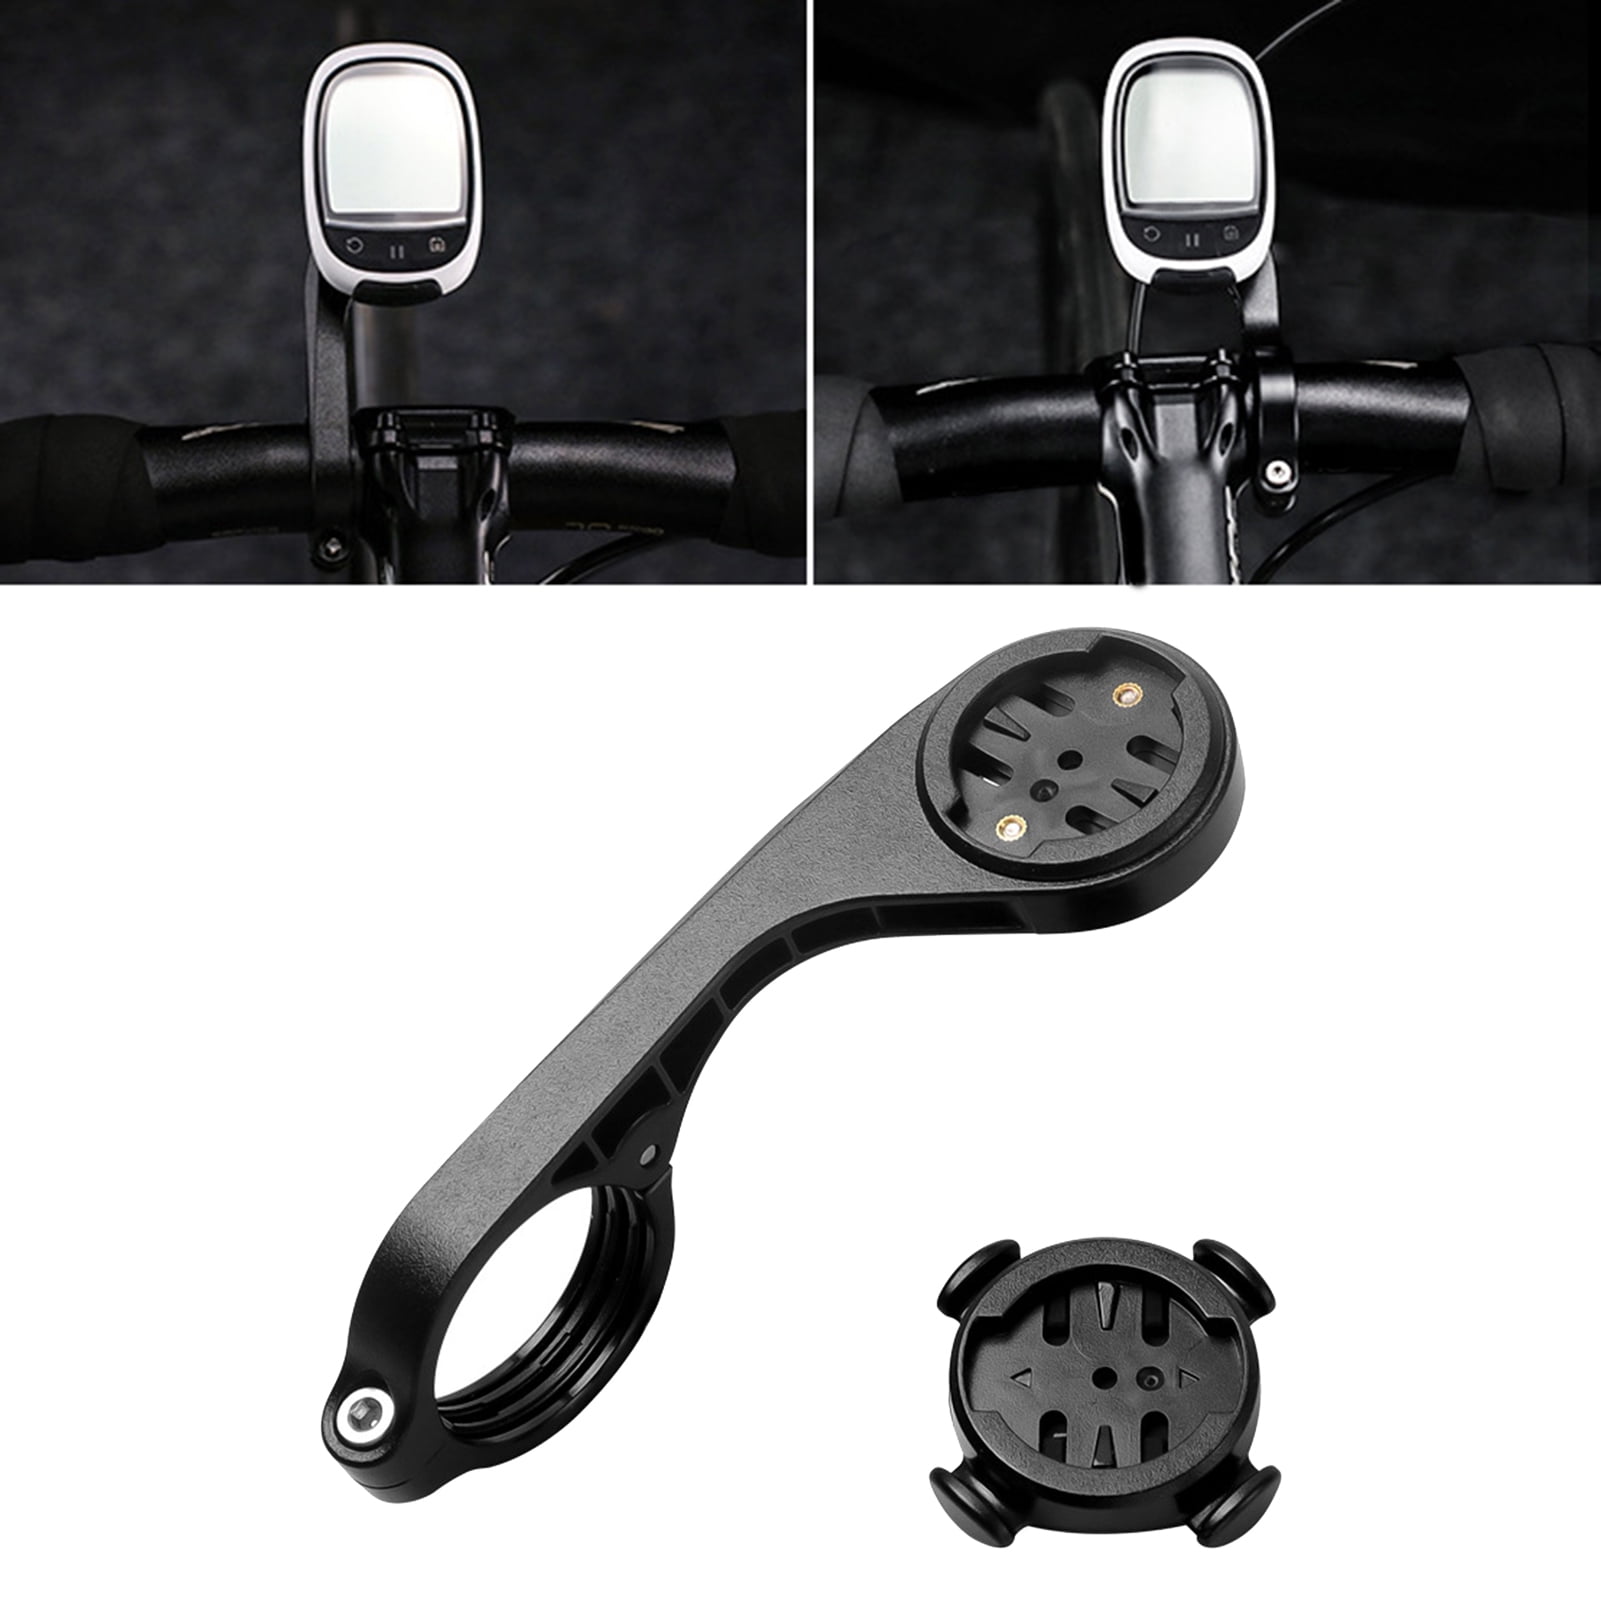 Anti Rust Very Practical. Pelnotac Bike Computer Mount Durable and Lightweight,Well Designed Sturdy,Easy to Install and disassemble for Installing Flashlight and Camera